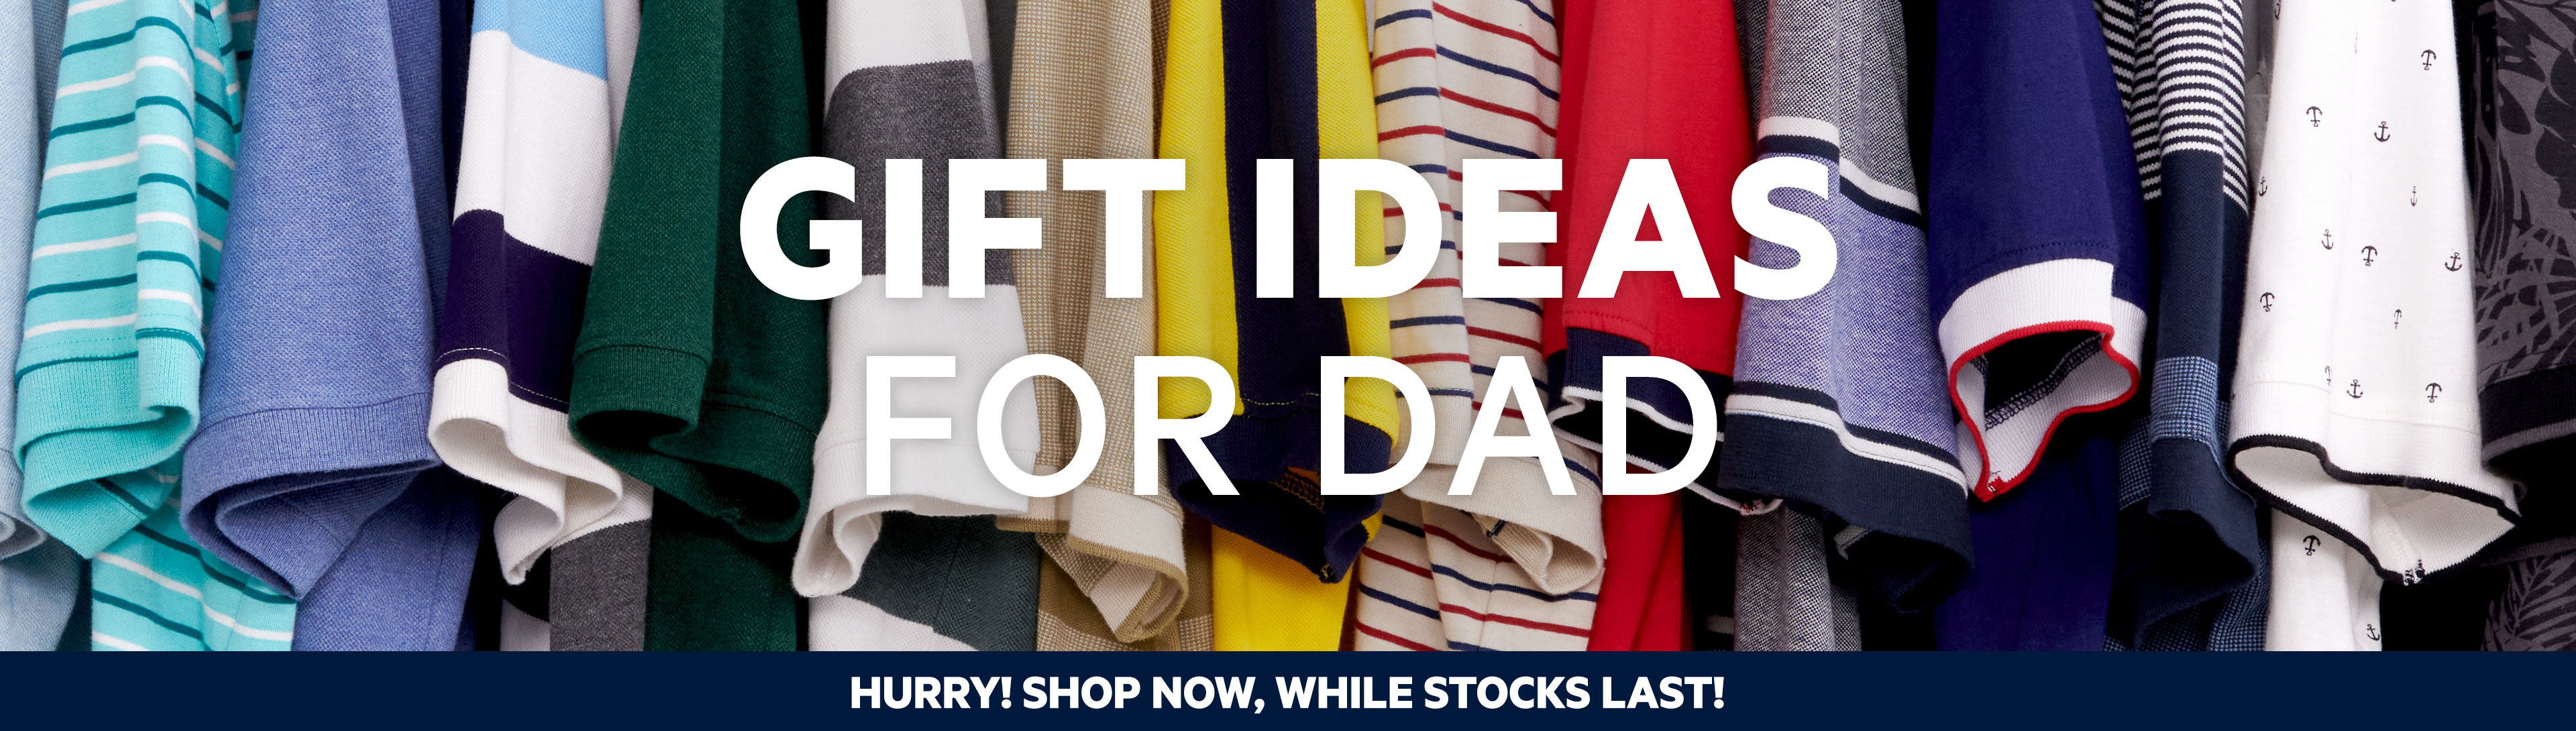 Harris Scarfe Father's Day sale - Up to 50% OFF on clothing, electrical, sporting goods & more